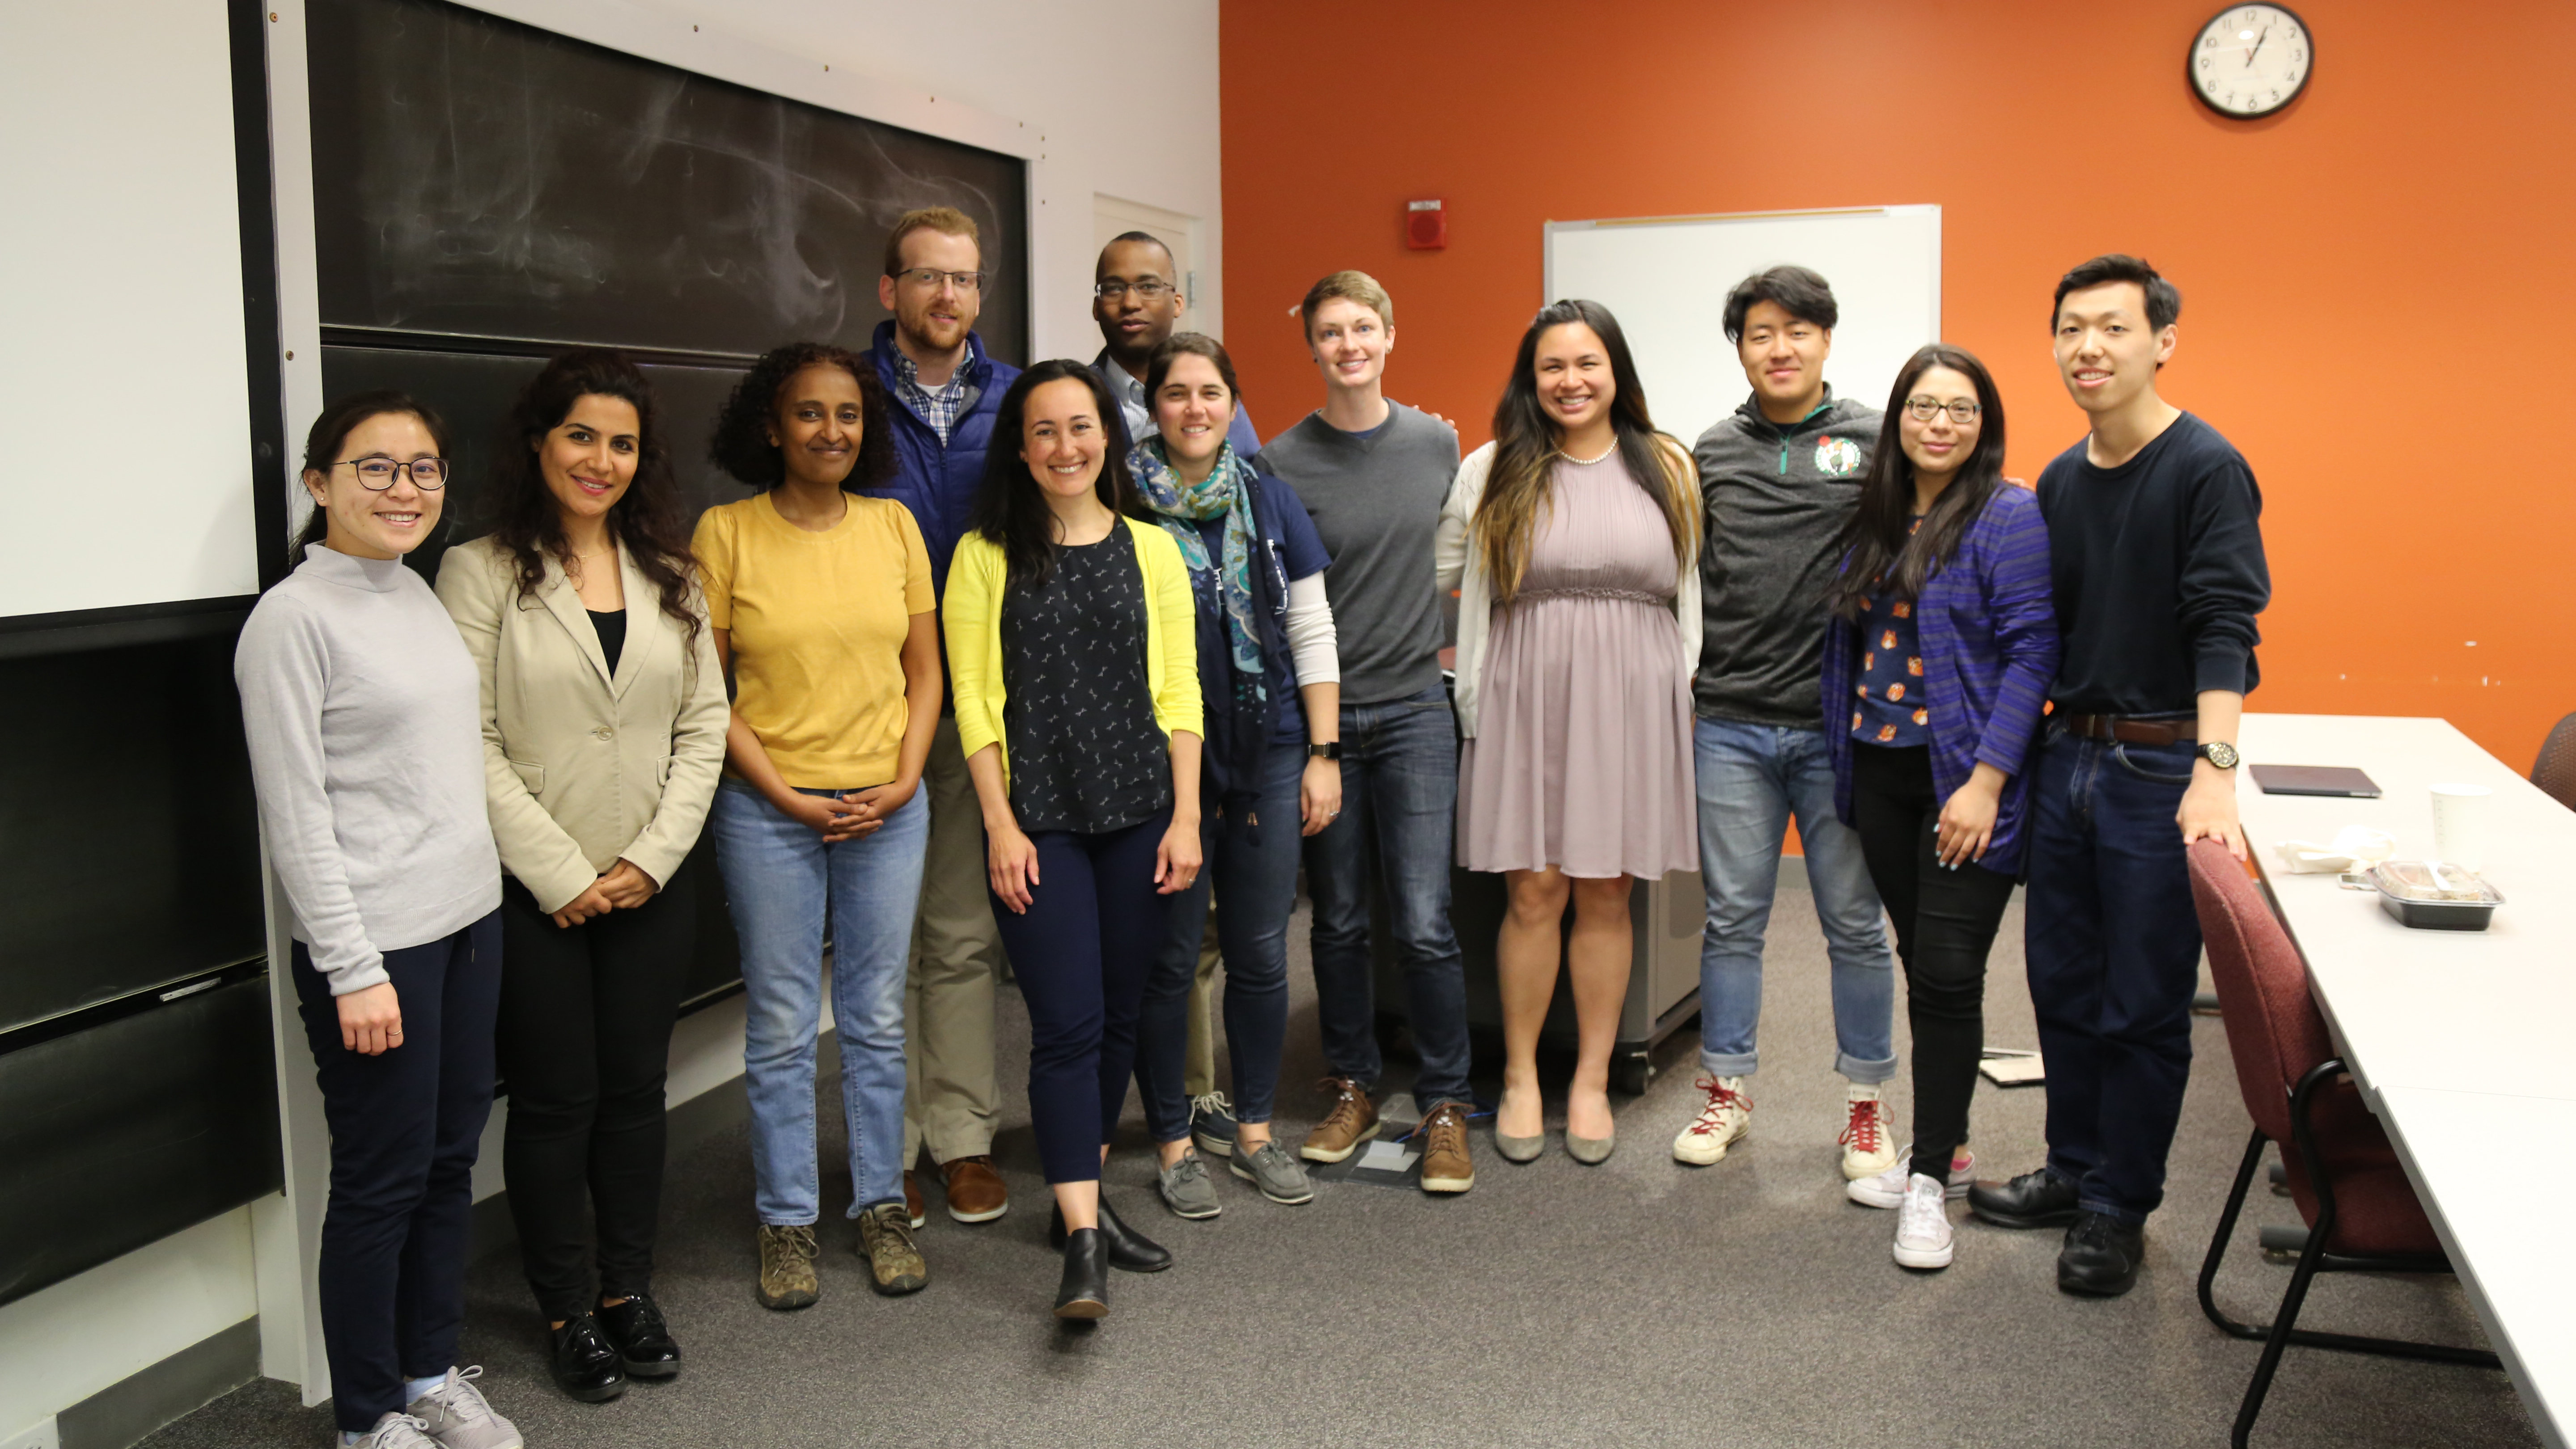 Sarah Zoen, MA SID'06, (center, yellow cardigan) with a group of students during a Lunch and Learn session hosted by the Heller Career Development Center